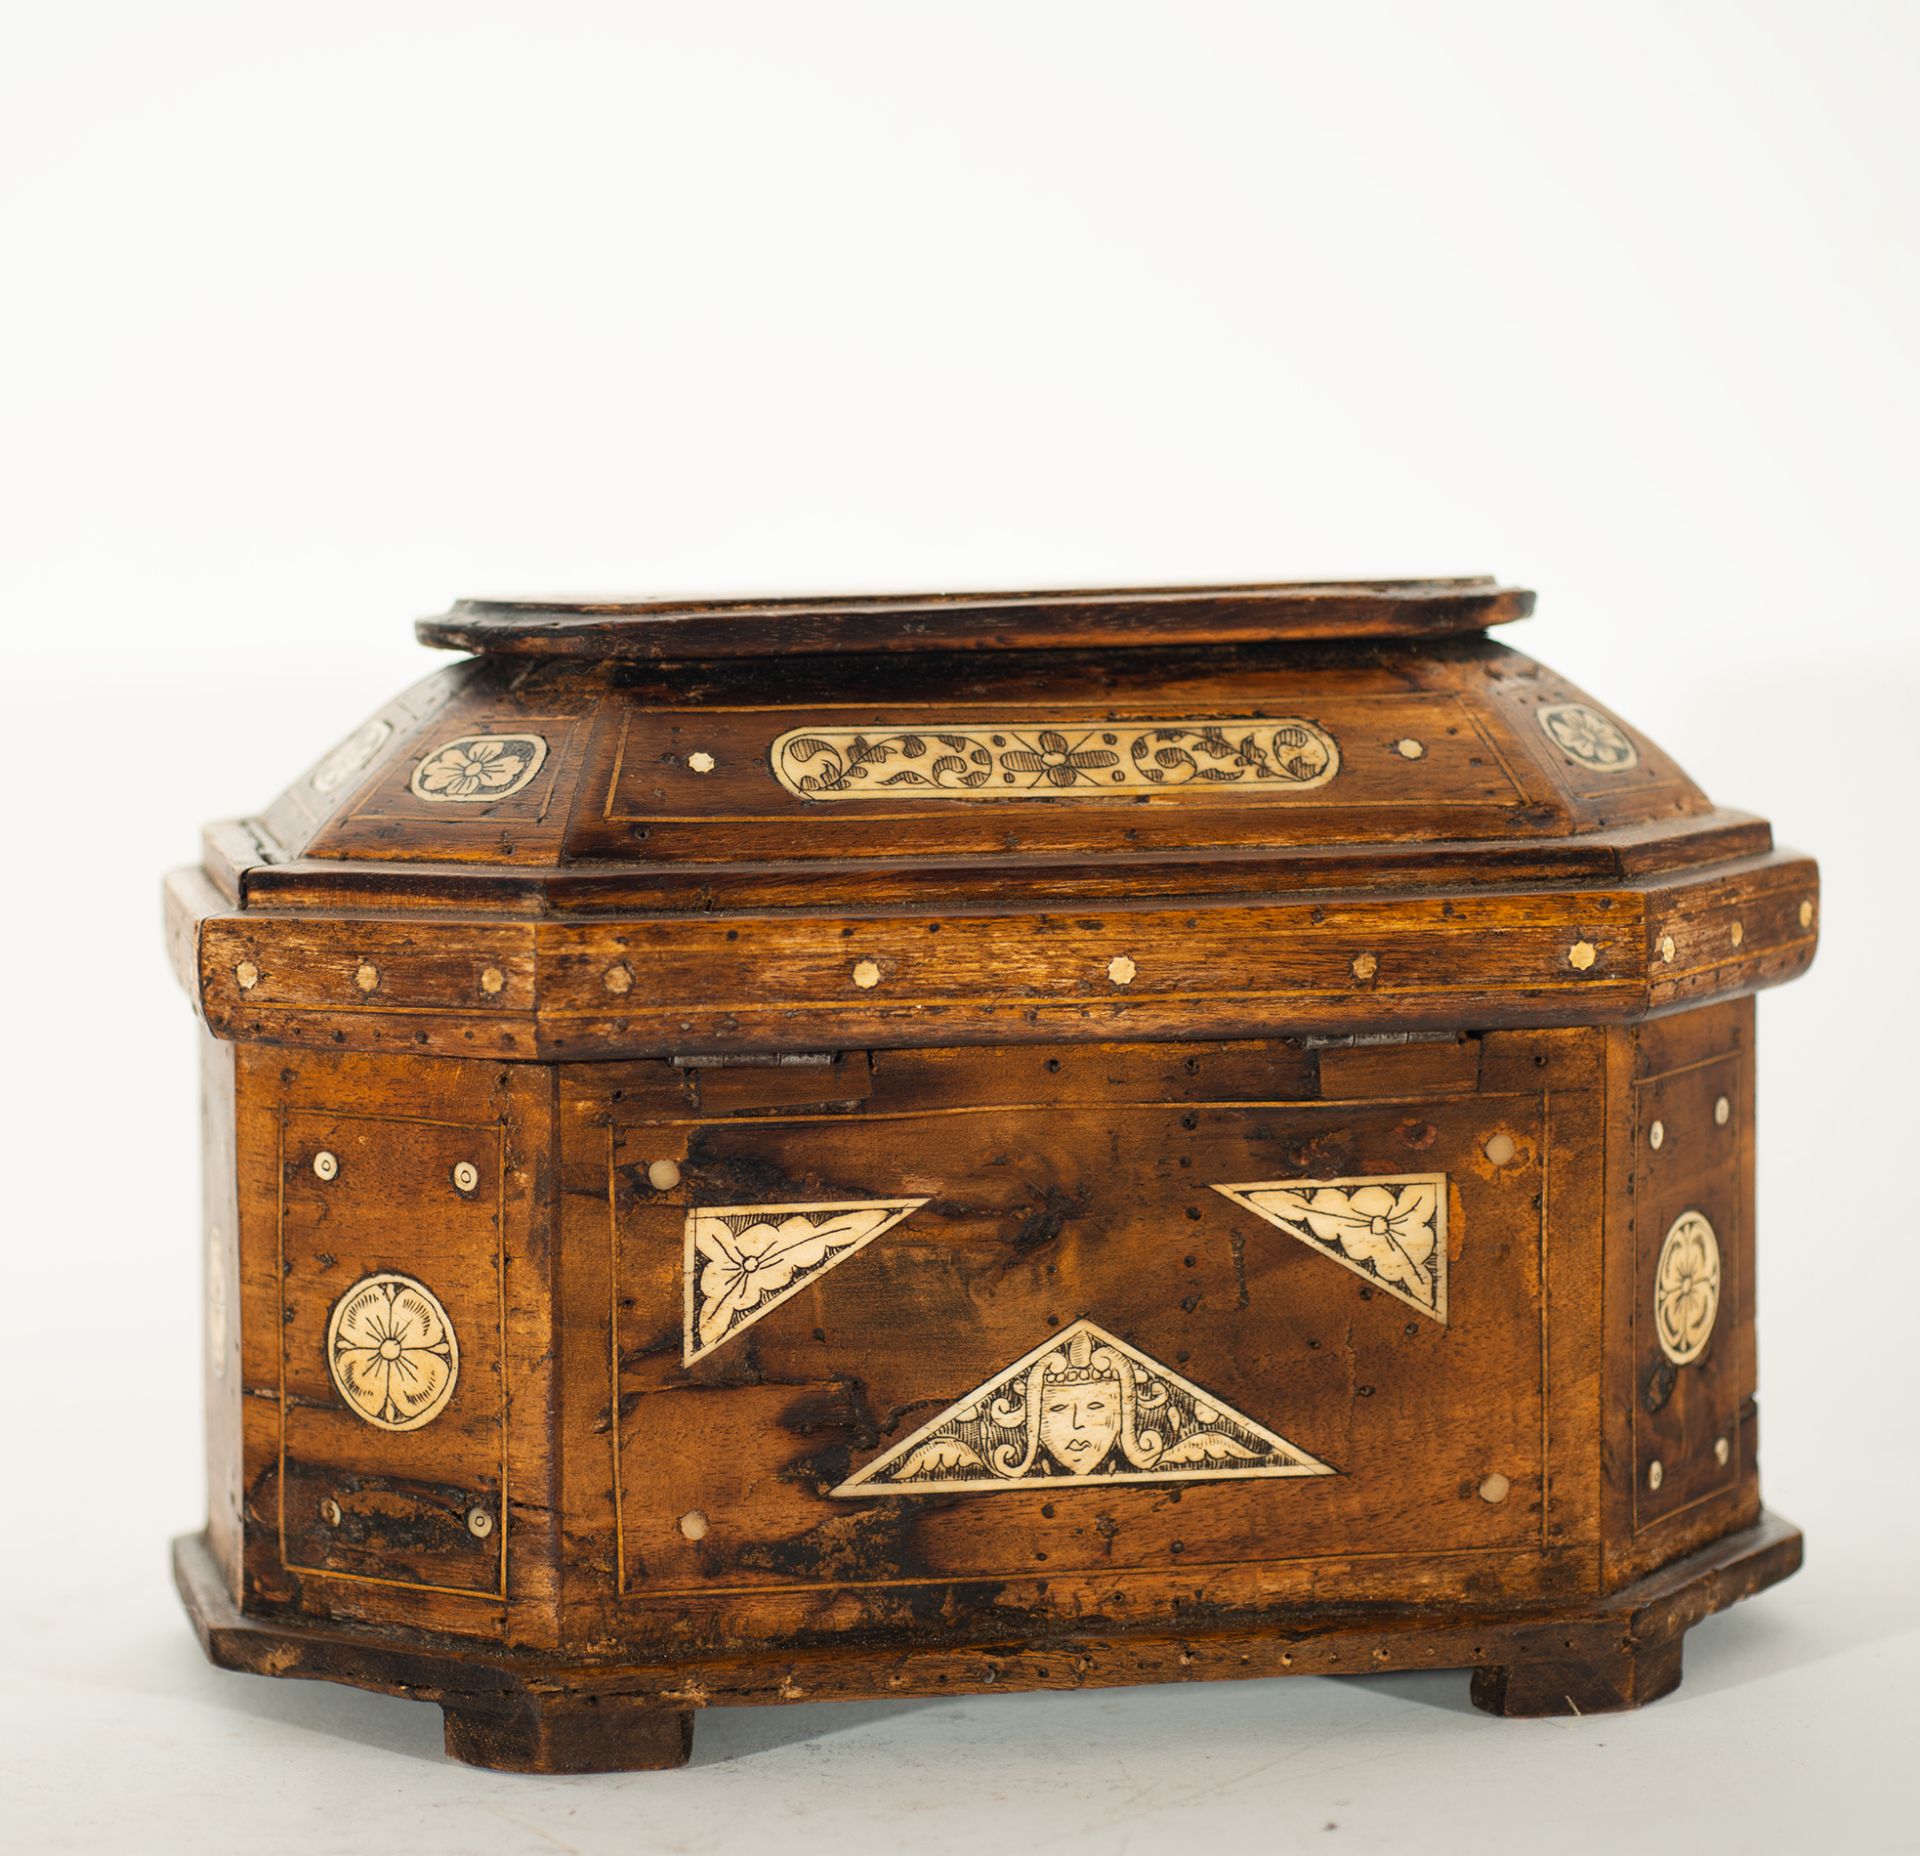 Renaissance style chest in fruit wood and carved bone applications, Spanish school of the 19th centu - Image 3 of 7